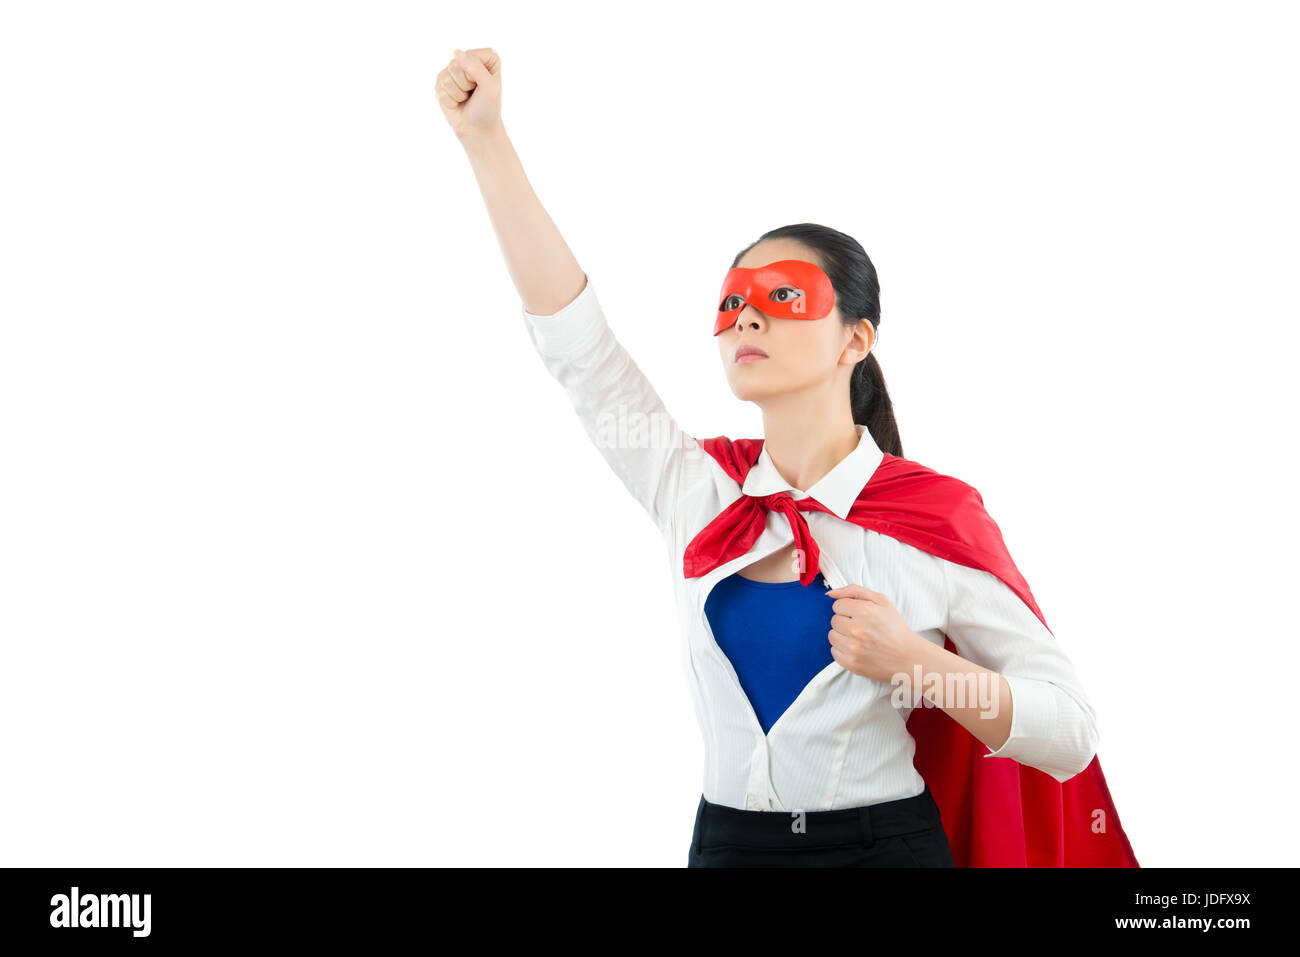 superhero gesturing fistand raise hand above means ready take off to sky with copyspace and opening office shirt showing hero clothing on the blank wh Stock Photo